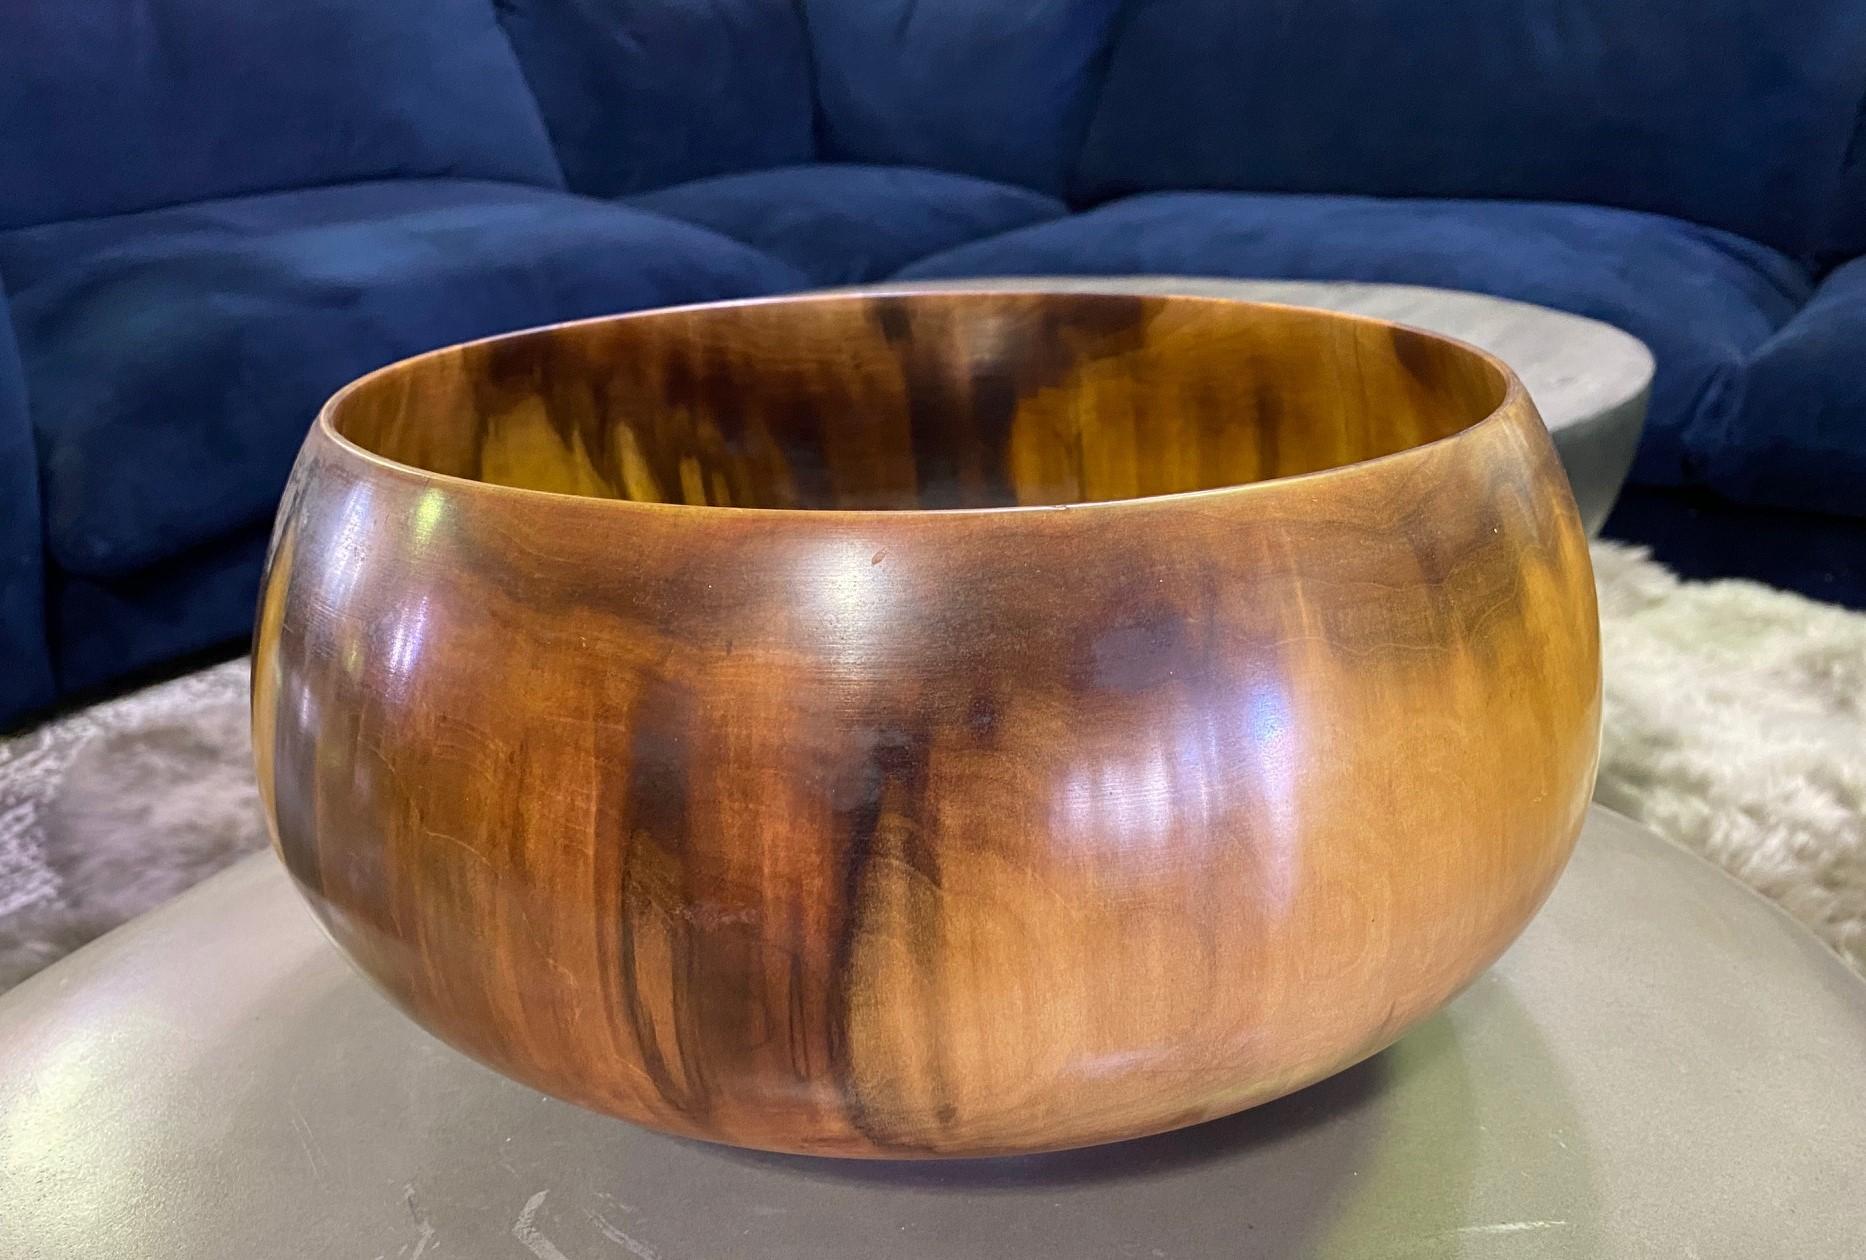 A magnificent work by 20th century master wood-turner/artist Ed Moulthrop who is recognized as the father of modern woodturning, and credited with moving woodturning from a simple craft to an art form. 

The tulipwood bowl is signed and